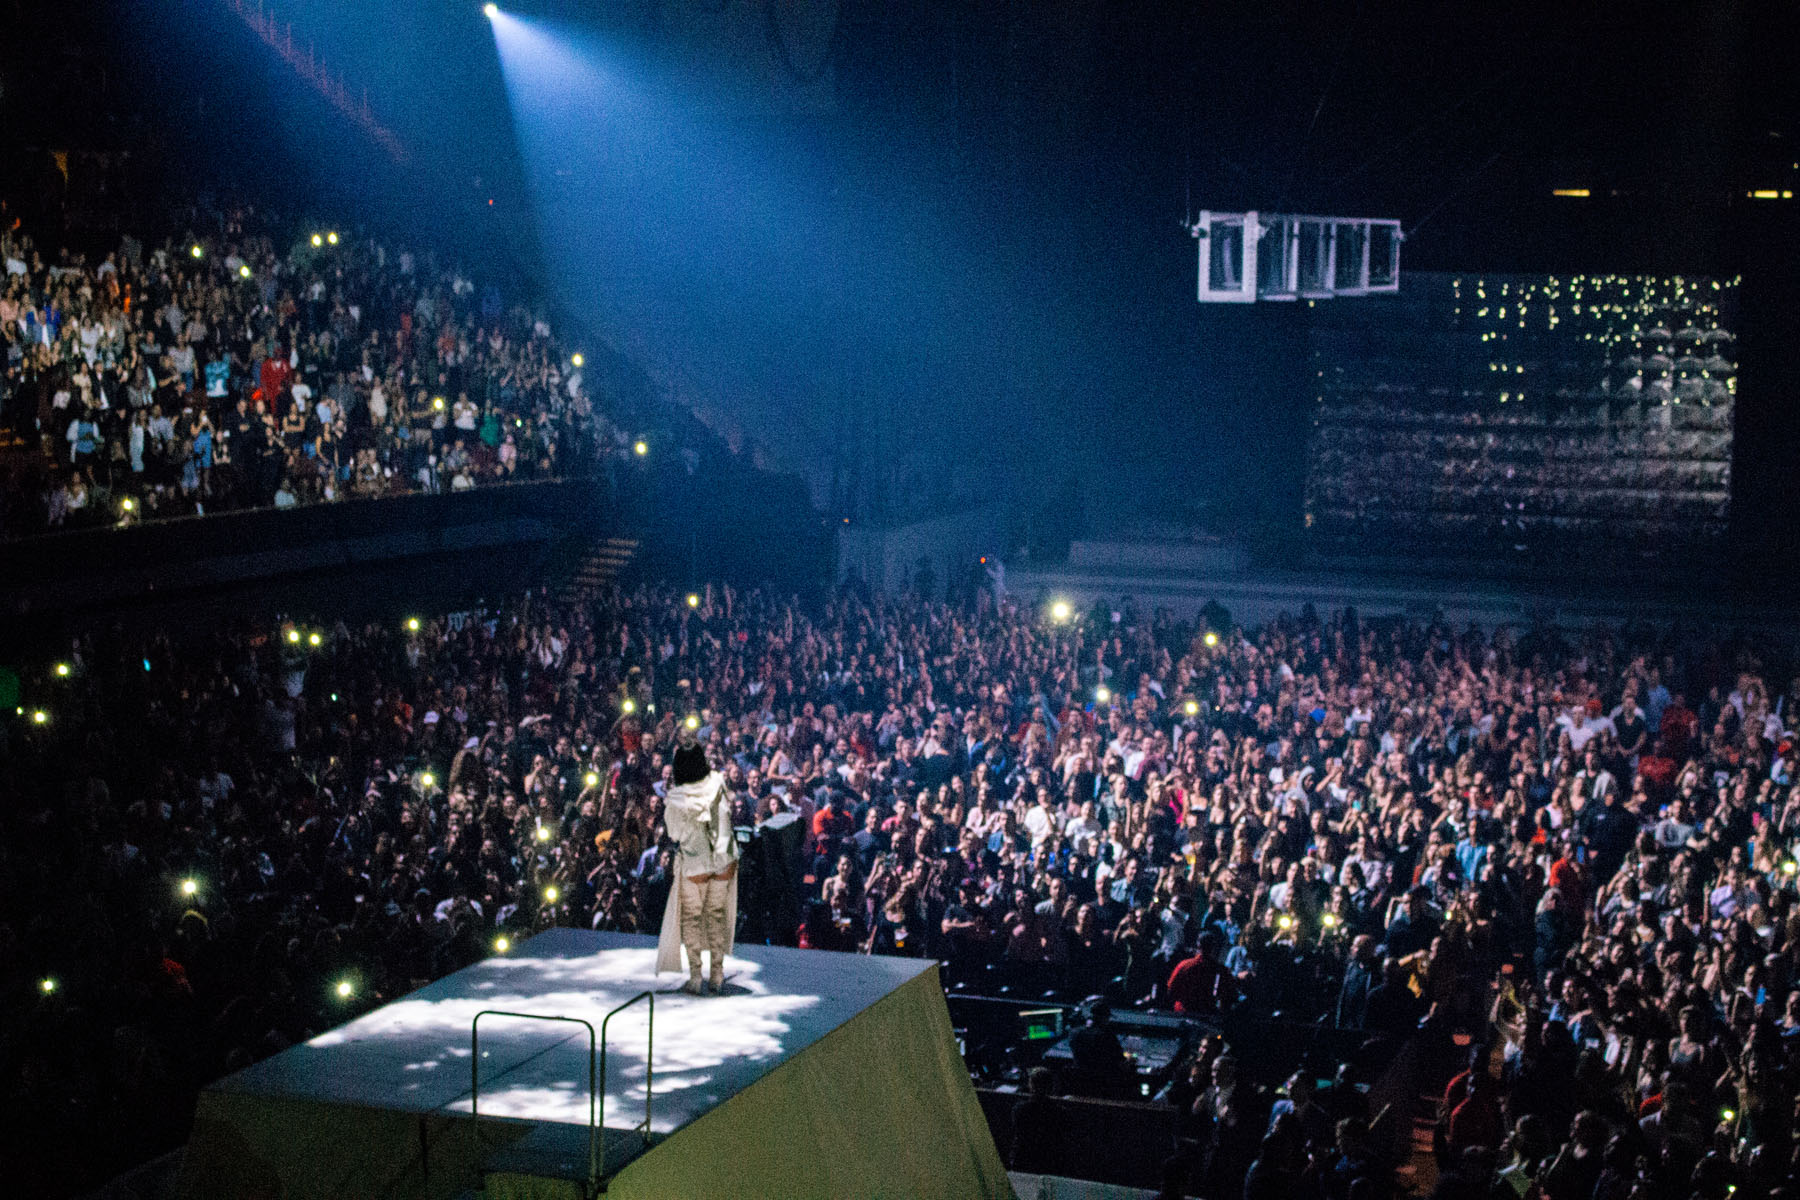  Rihanna at The Forum (May 3). / Photo: © Diane Abapo for SUSPEND Magazine. 